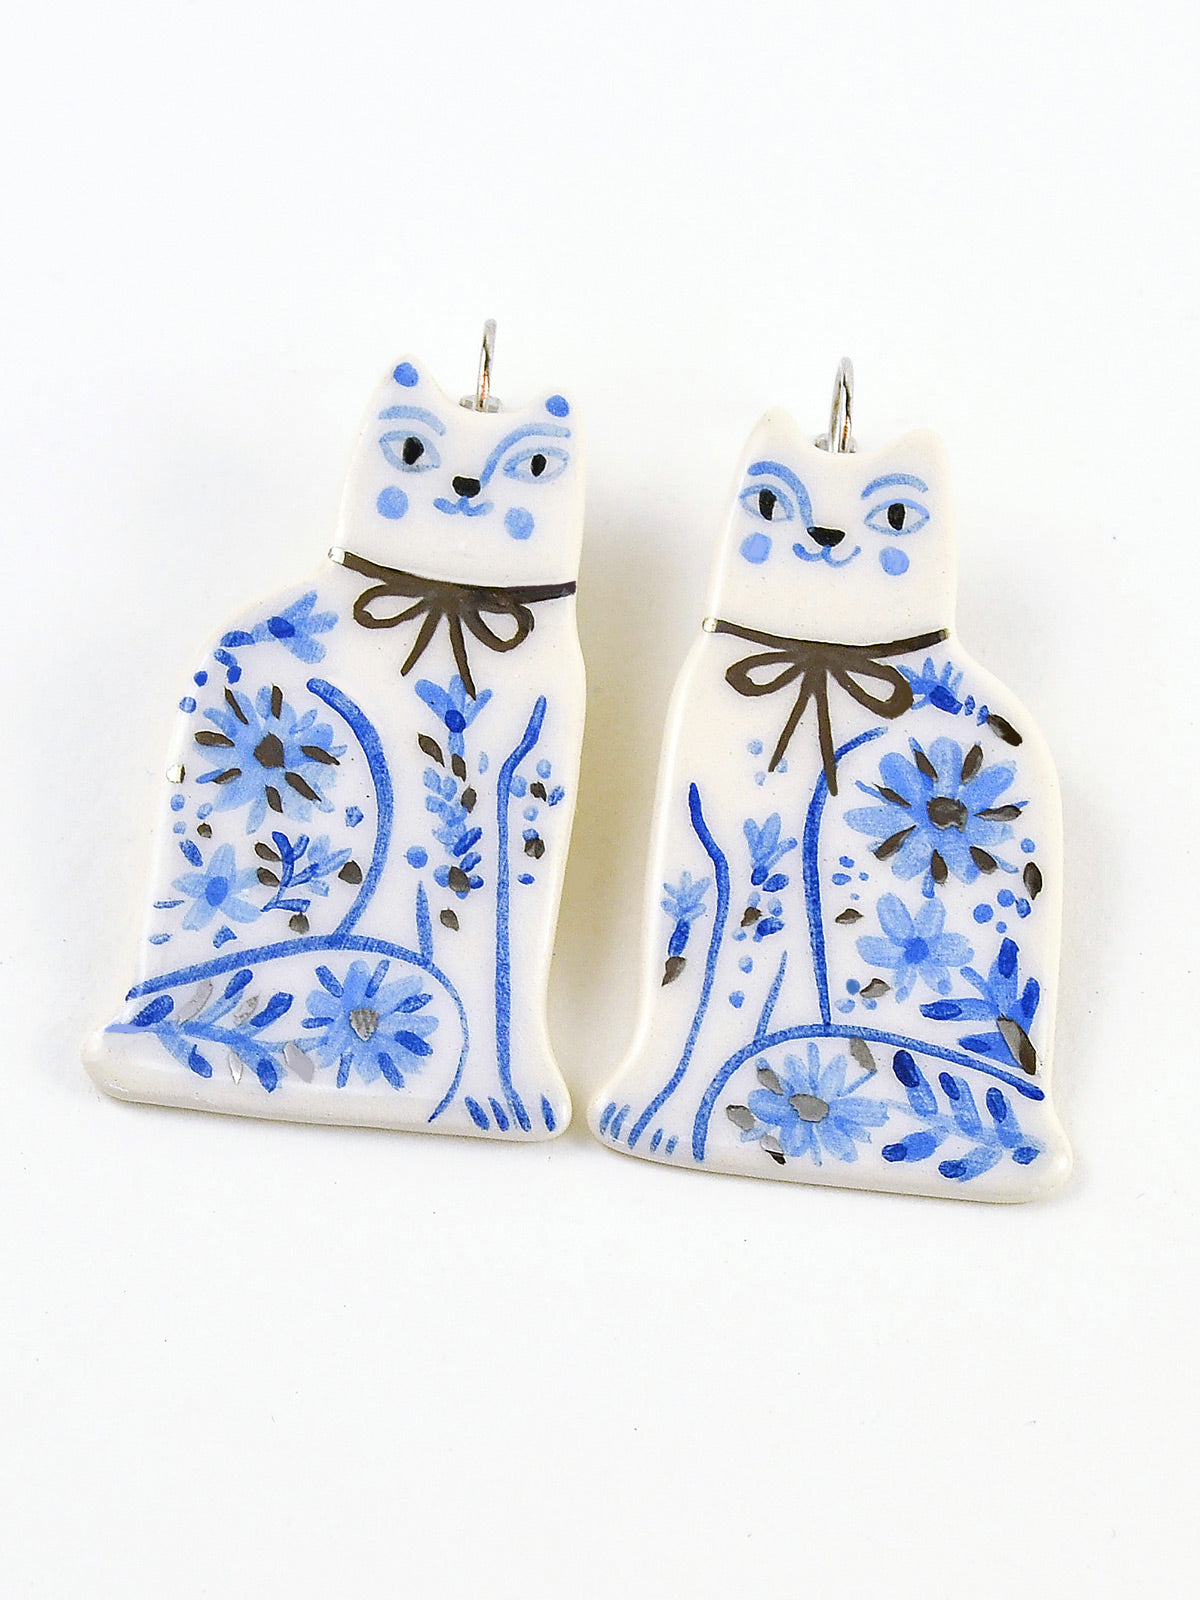 Ceramic Handpainted Cat Earrings with Flowers - Silver/Blue